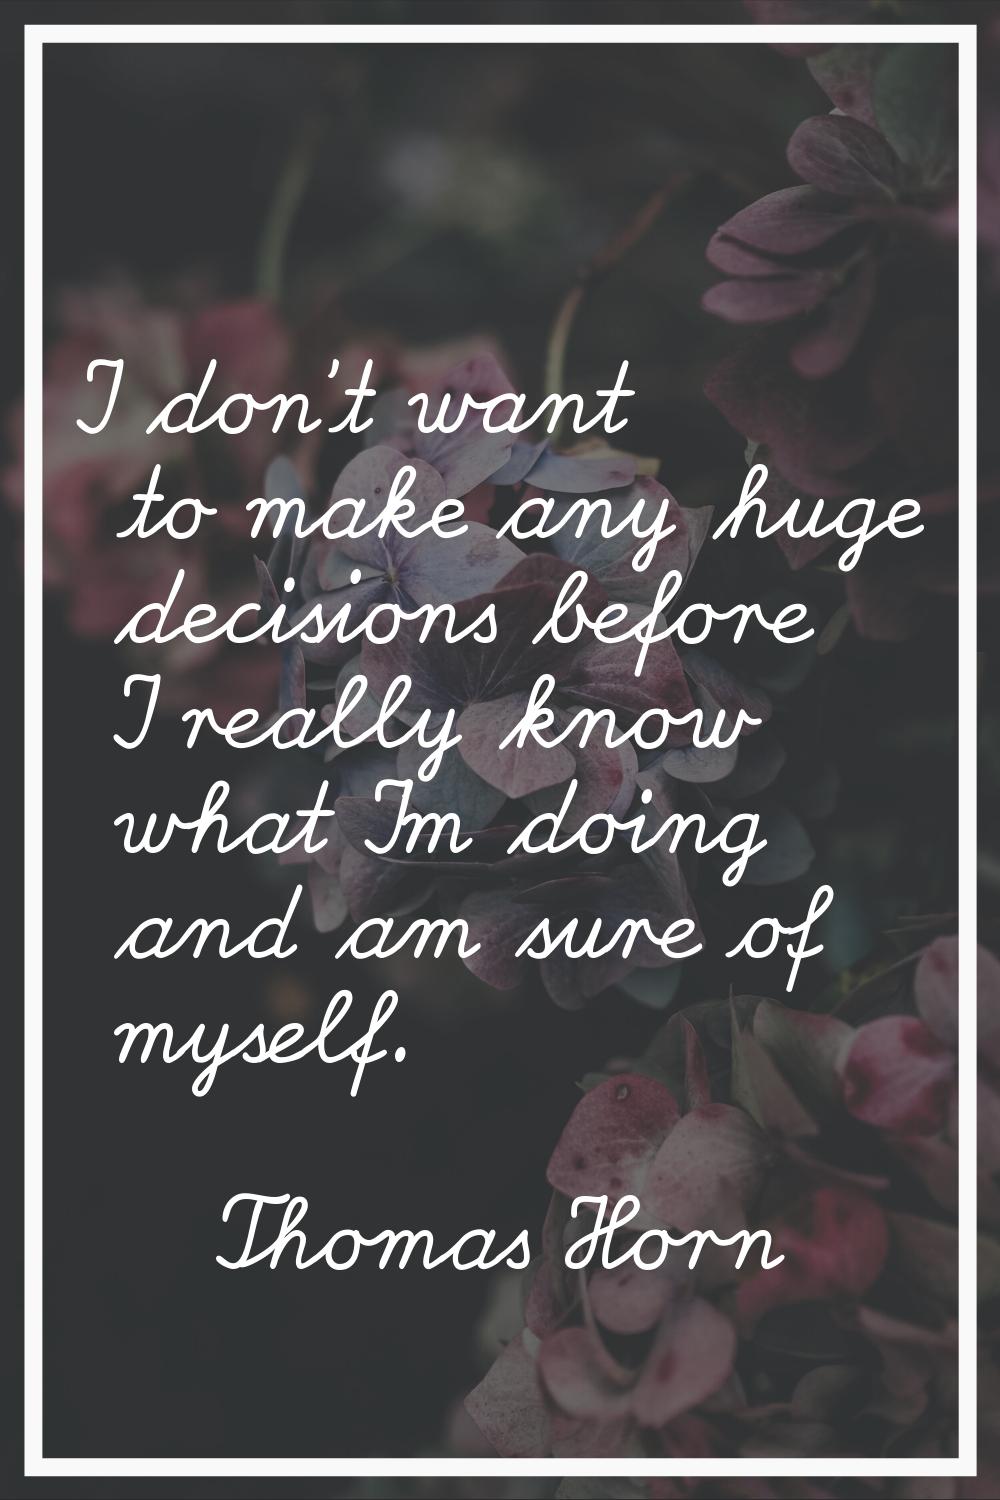 I don't want to make any huge decisions before I really know what I'm doing and am sure of myself.